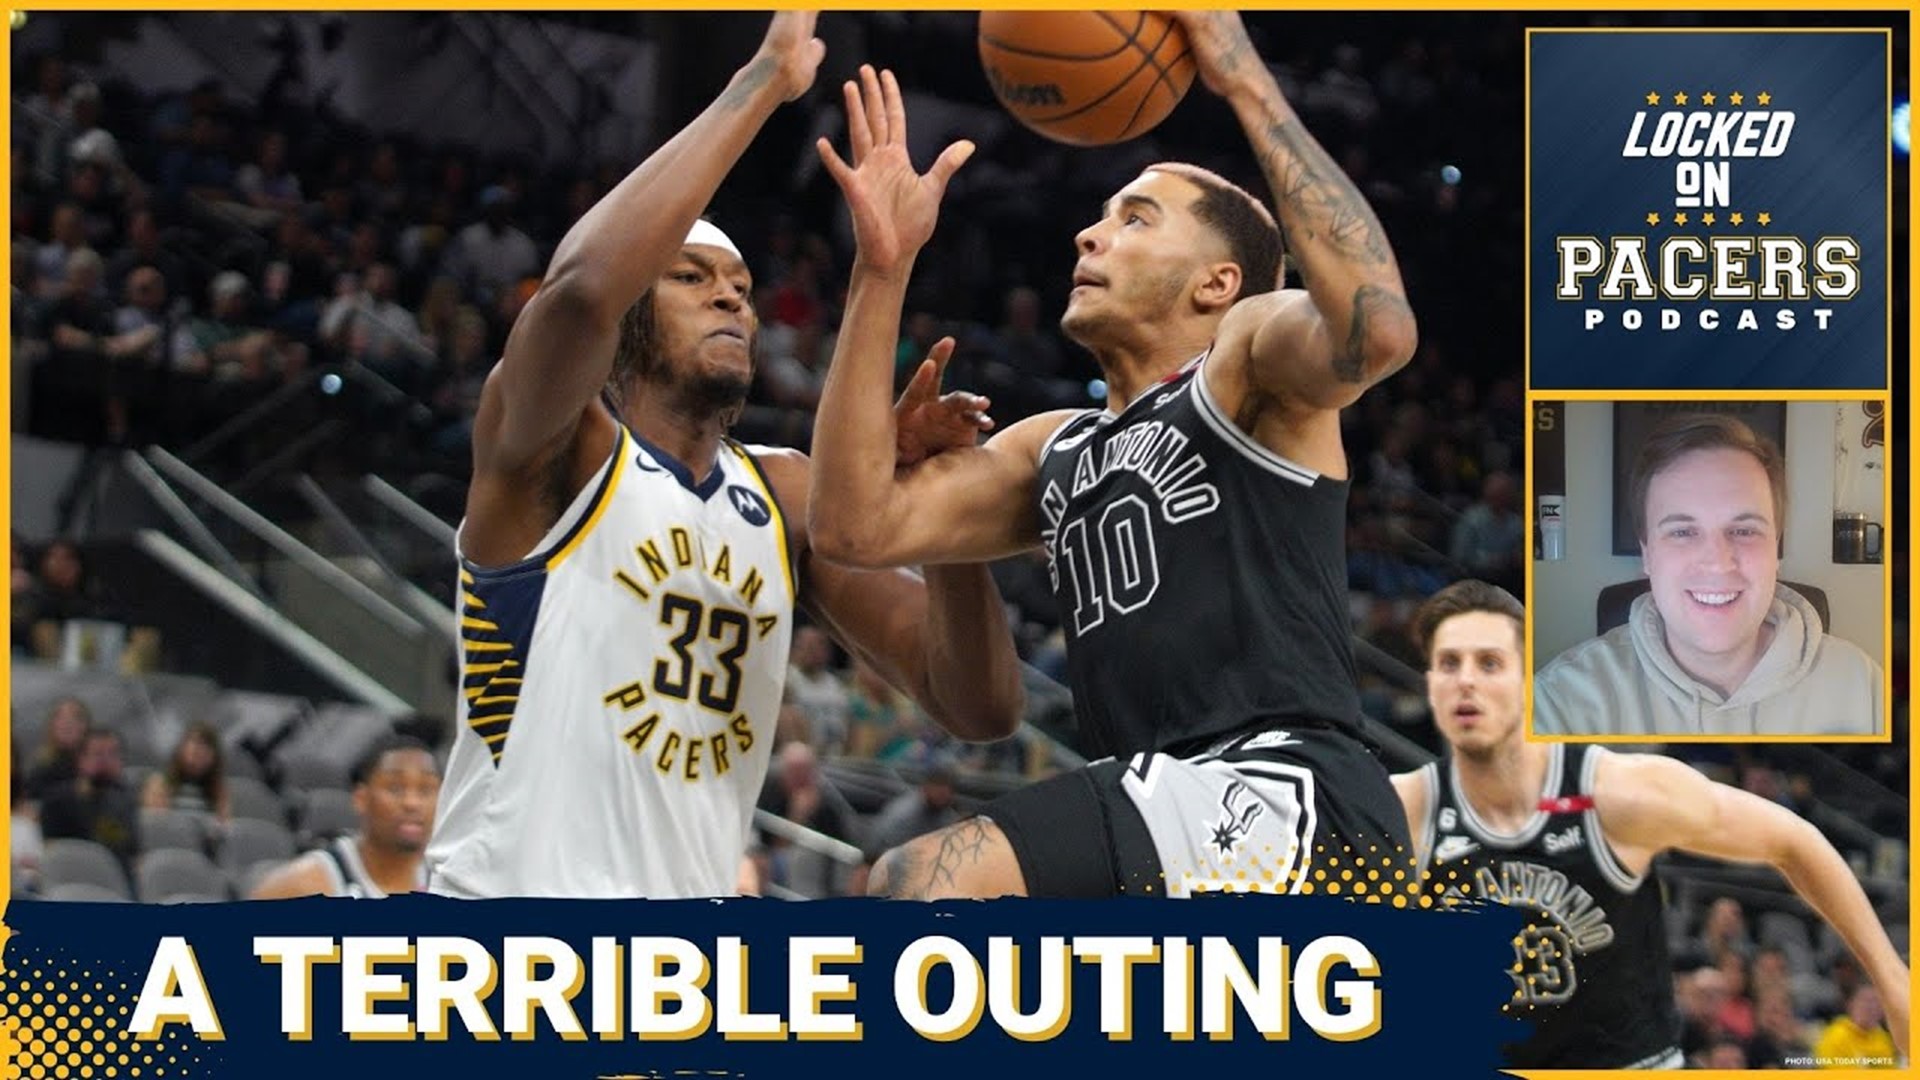 The Indiana Pacers had one of their worst outings of the season against the San Antonio Spurs.